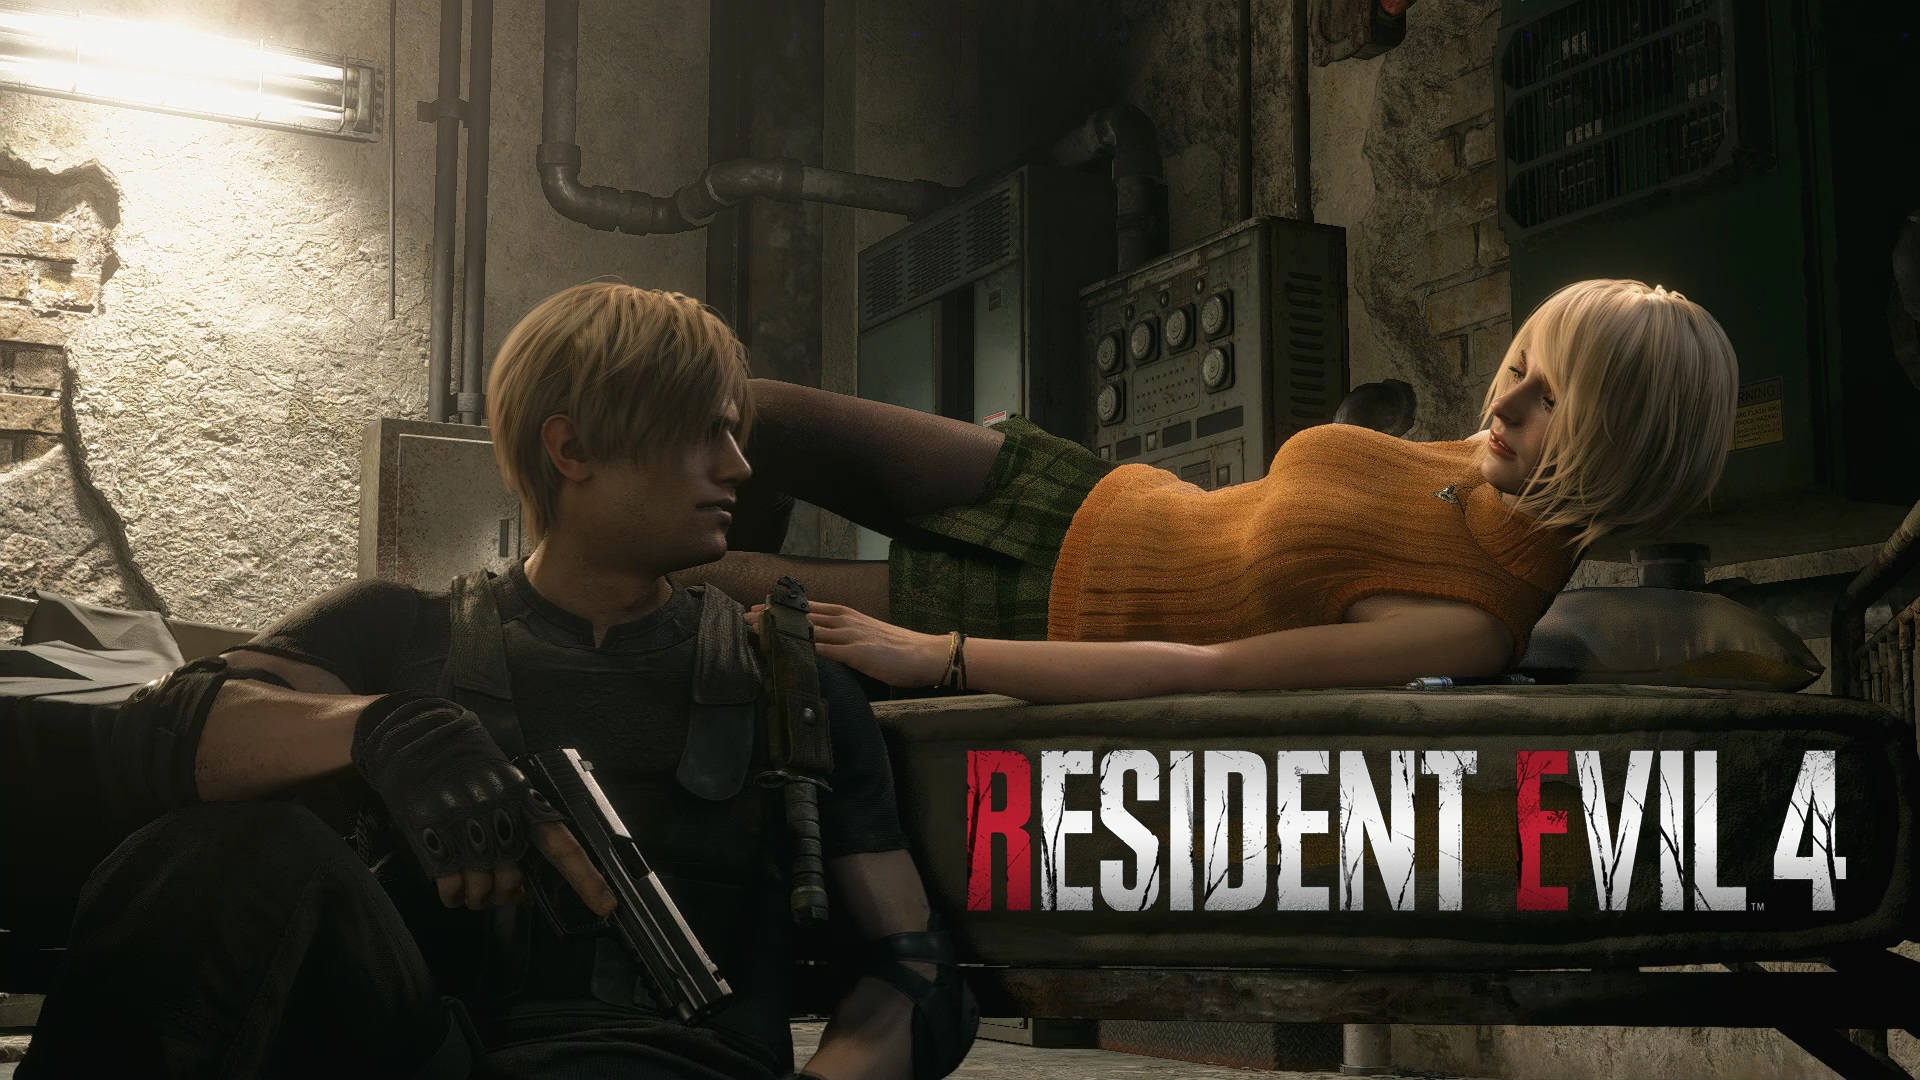 Resident evil village пишет steam is currently in offline mode фото 57